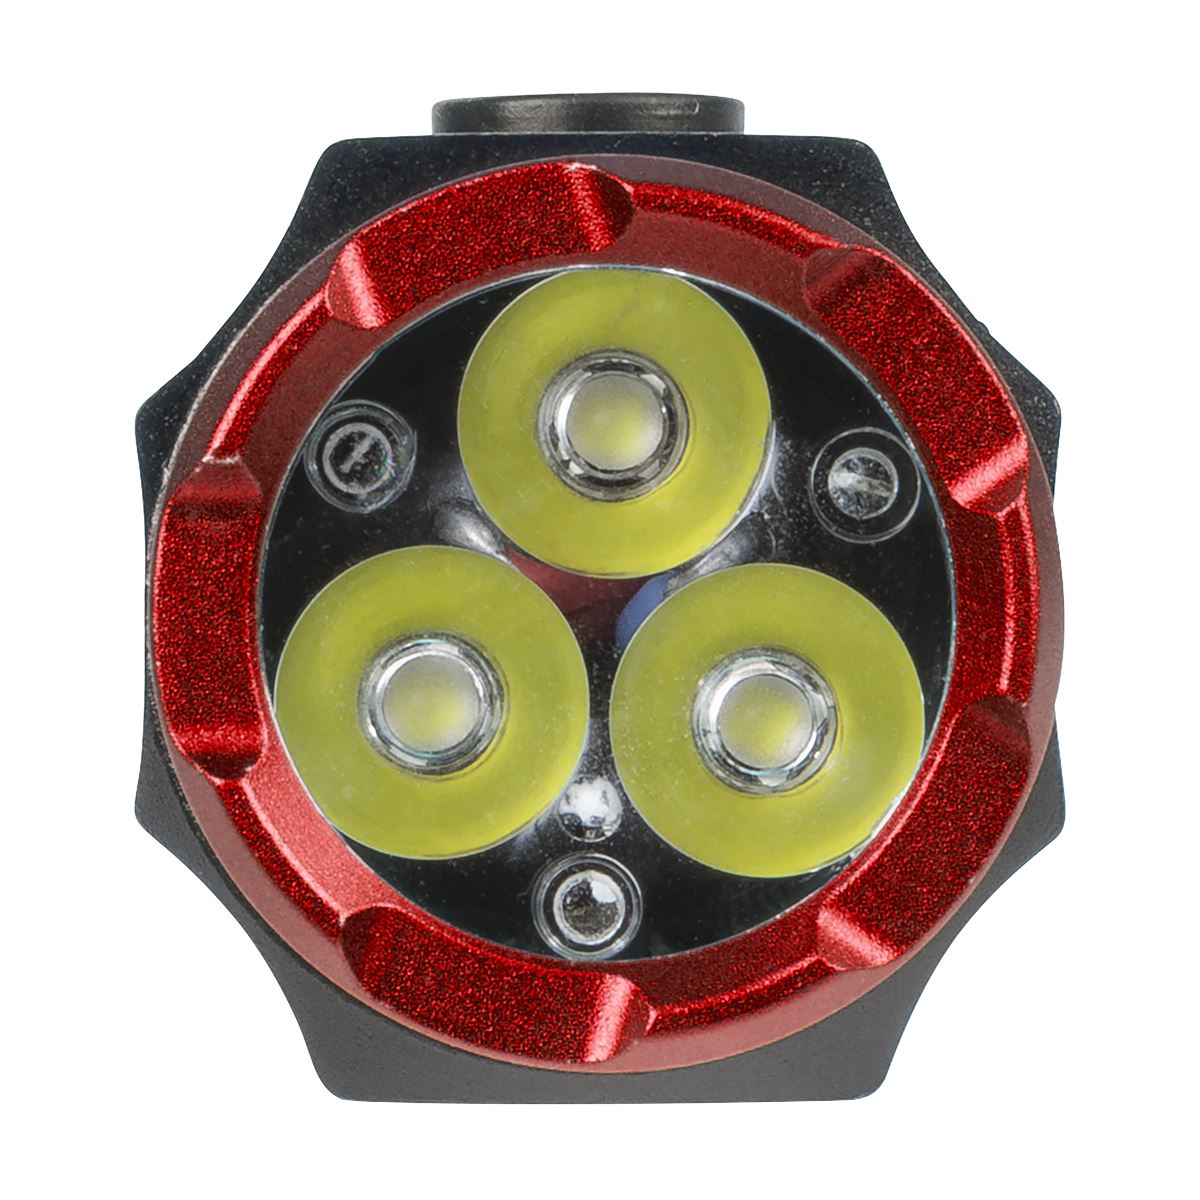 Sealey Super Beam 2500lm Rechargeable SMD LED 24W Pocket Light